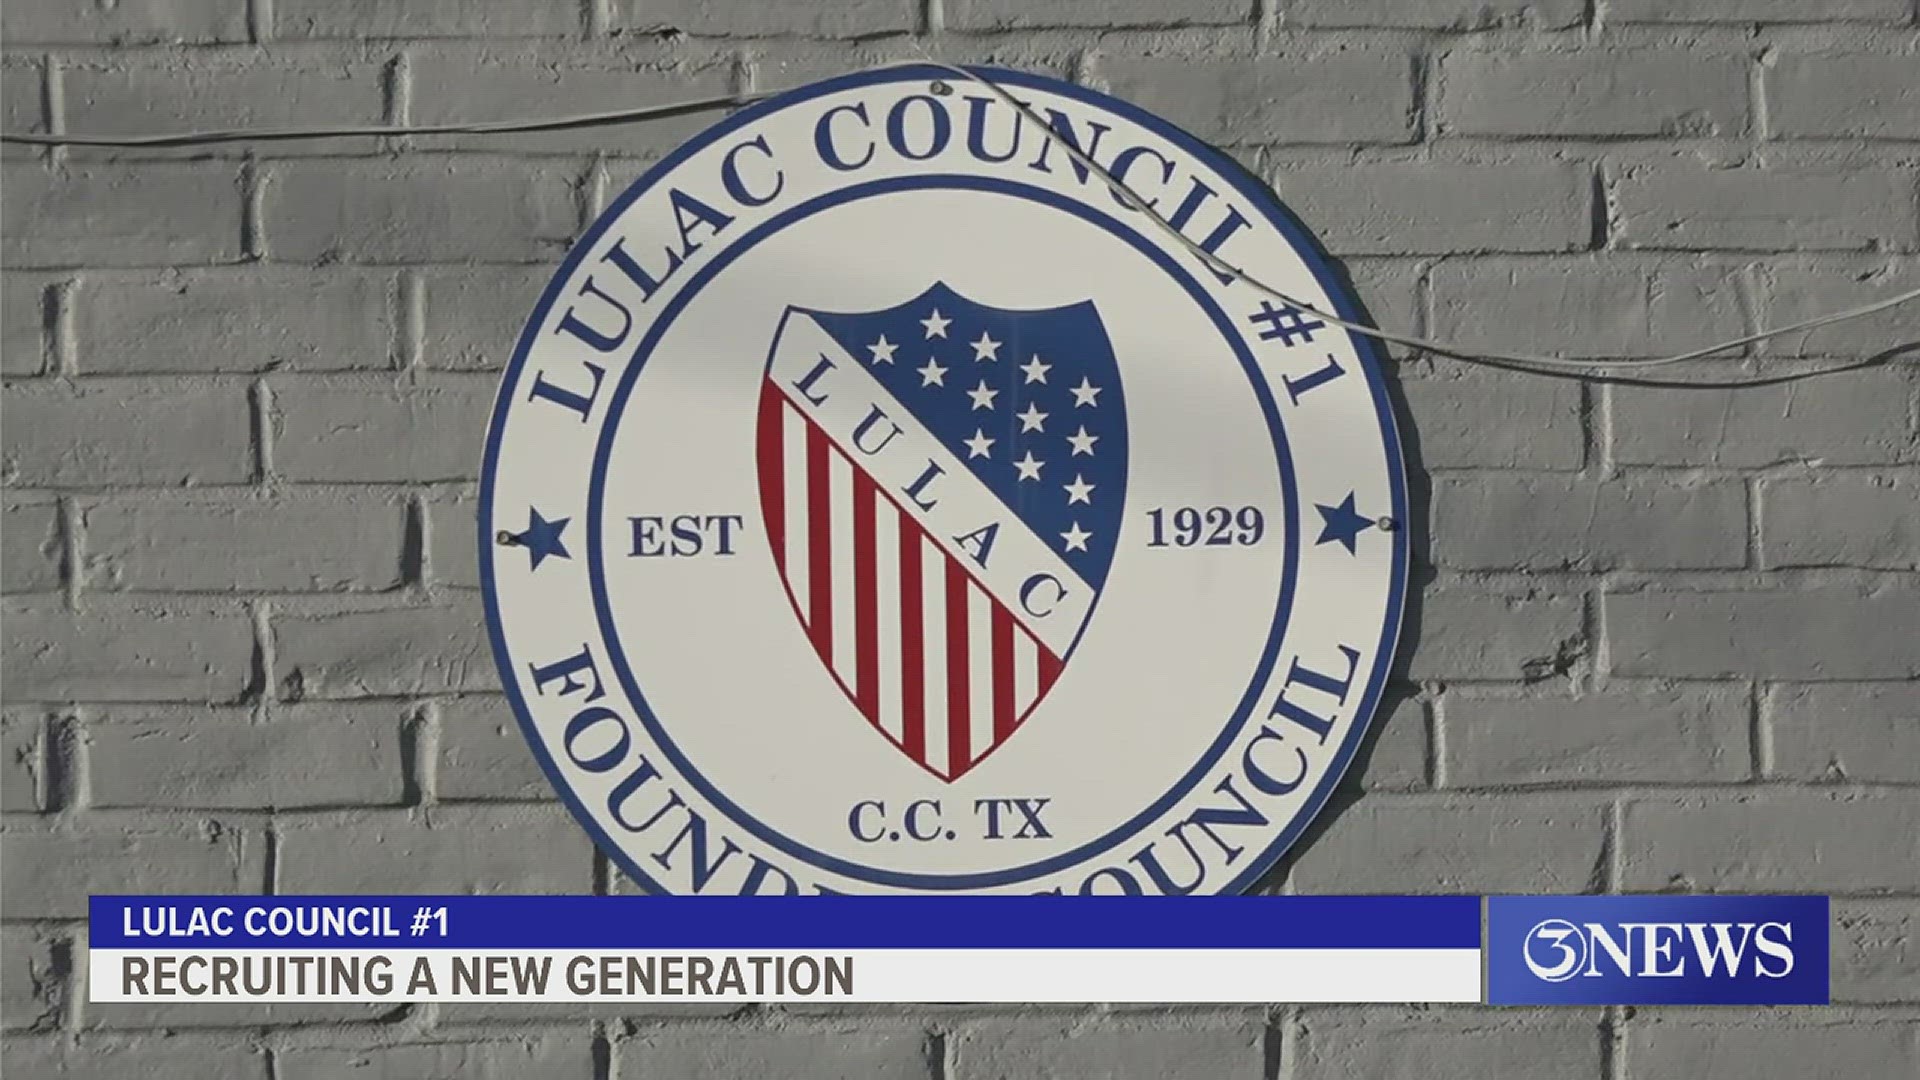 "I'm 74 years of age, so eventually at some point, I’m going on." Long-time members of LULAC's founding council are looking to a new generation to uphold its legacy.